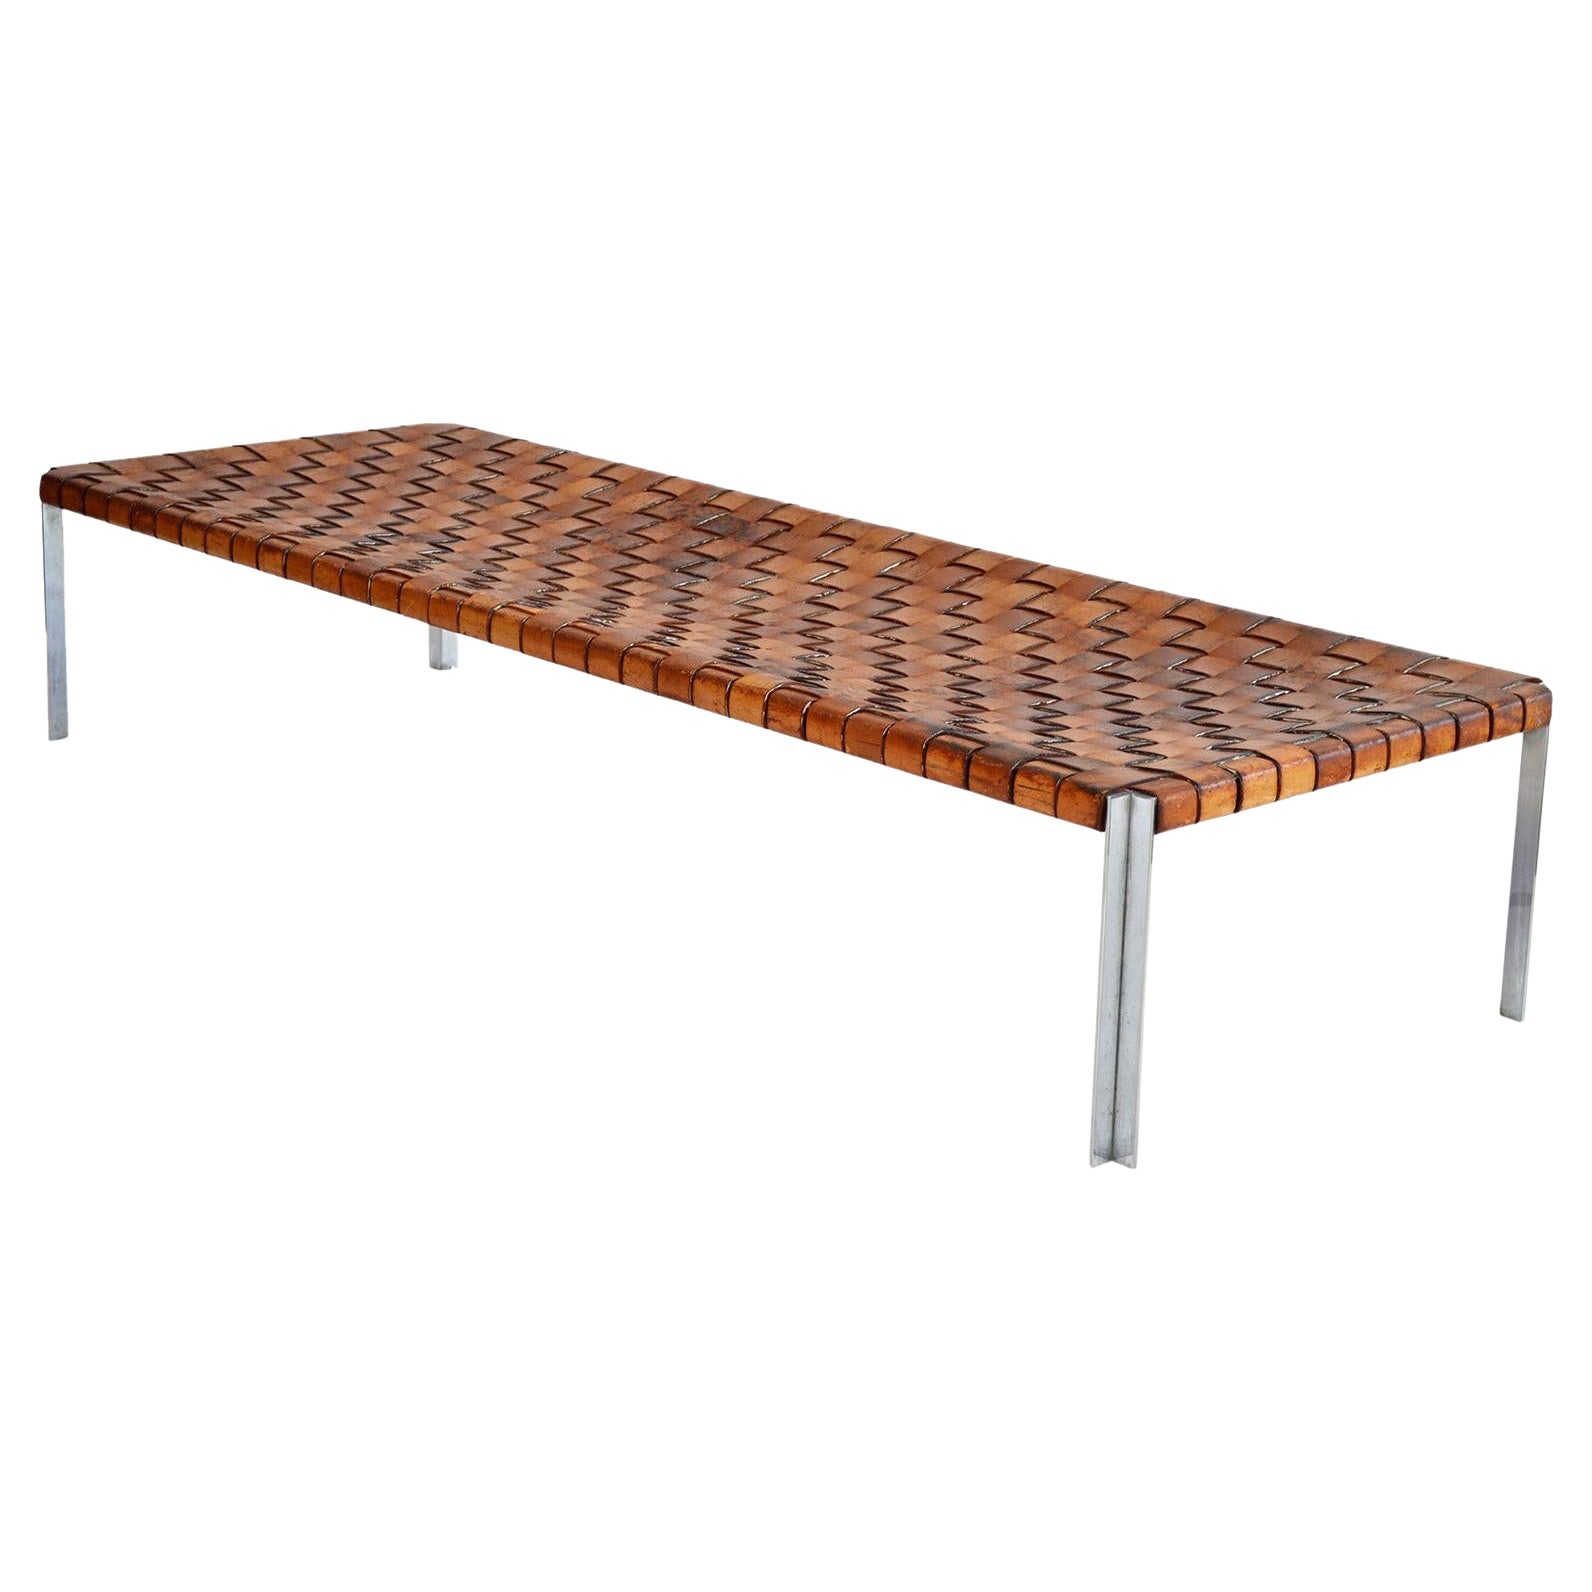 Vintage Woven Leather Long Bench by Katavalos Littell and Kelley Laverne c.1950s